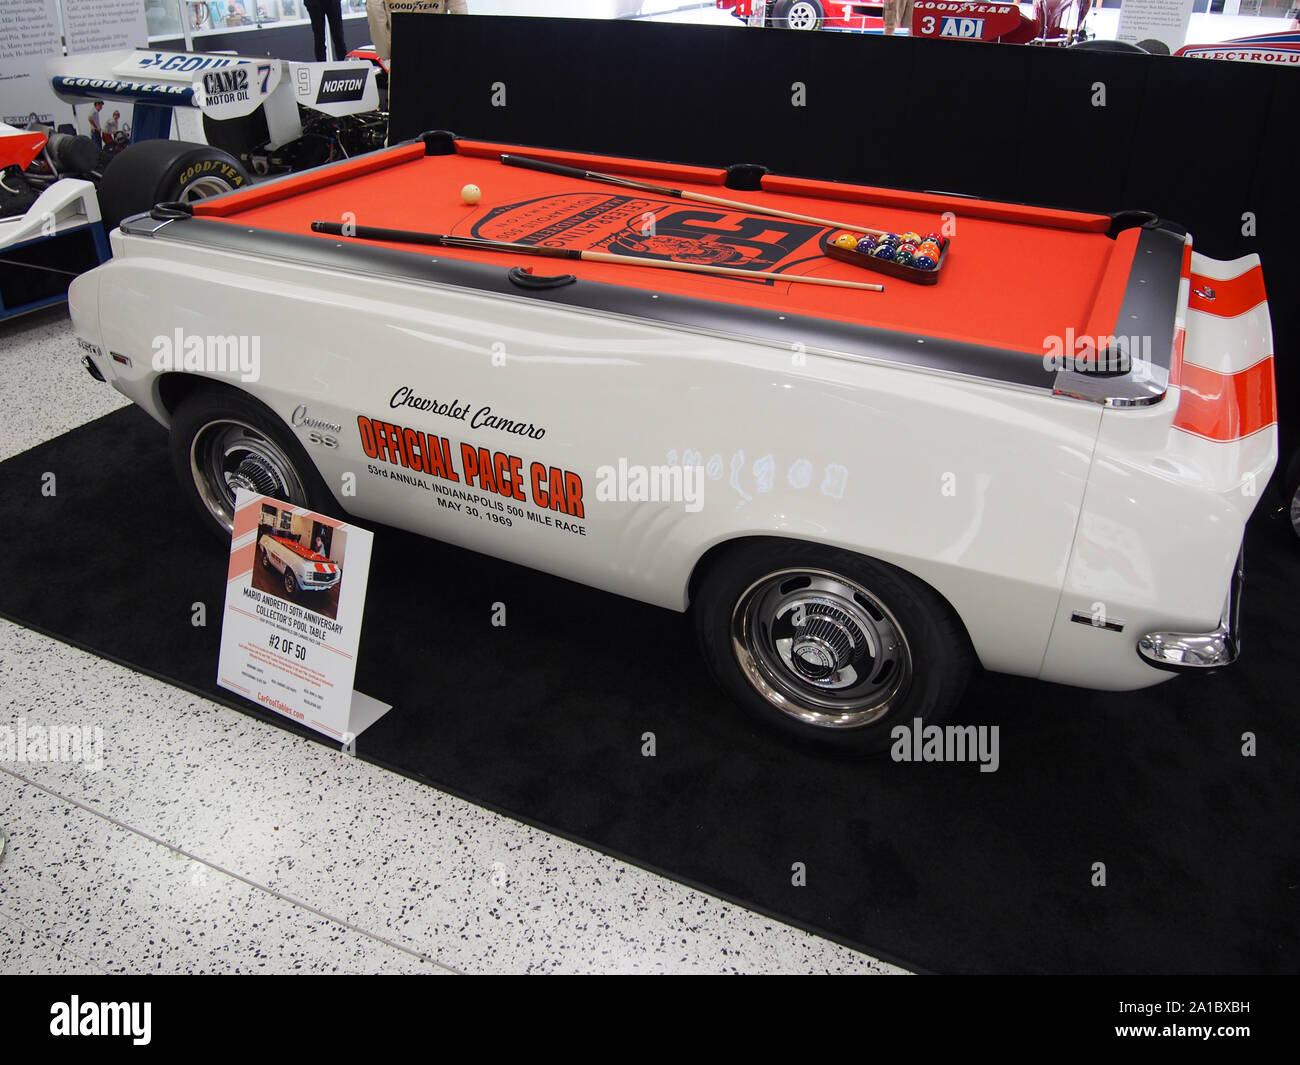 Chevrolet Camaro Official Pace Car converted to pool table on display at the Indianapolis Motor Speedway Museum, Indiana, July 28, 2019, © Katharine A Stock Photo